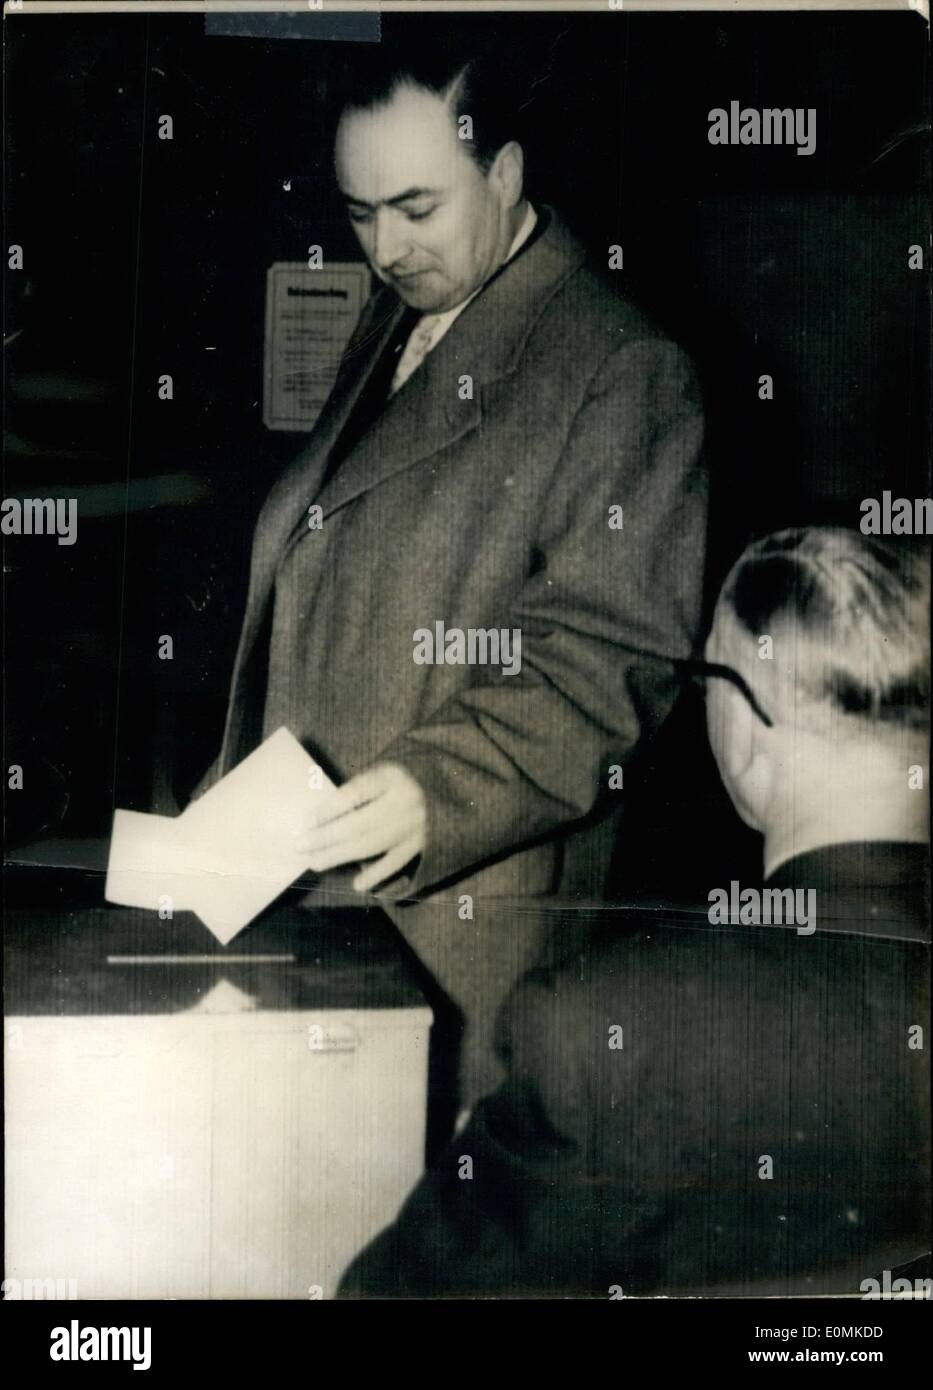 Oct. 10, 1955 - Saar Plebiscite: The plebiscite for European status took place in the Saar today. Photo Shows: The pro-German leader Schneider in a polling station at Saarbrucken, this morning. Stock Photo